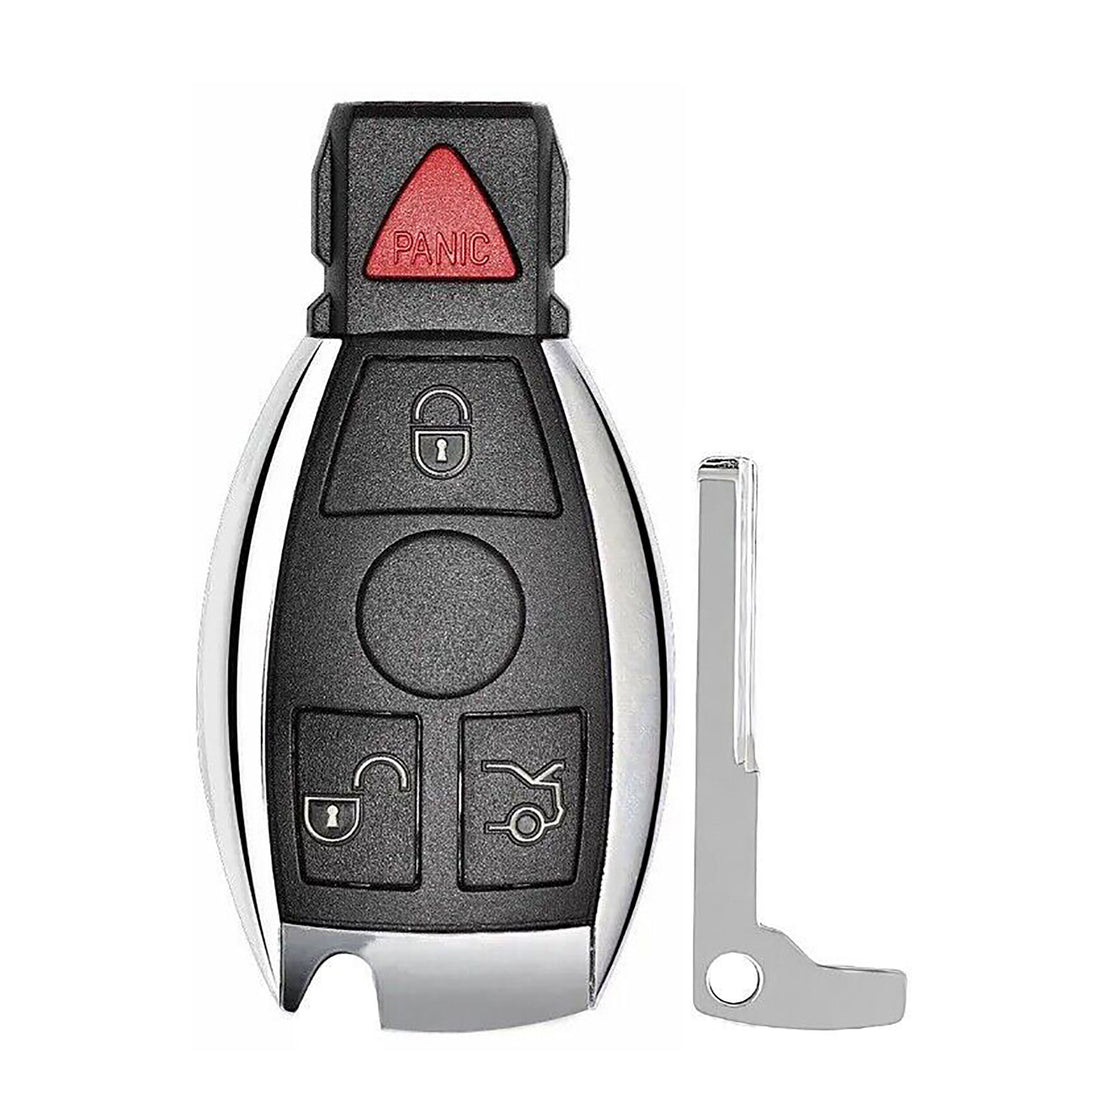 1x New Replacement Remote Key Fob Compatible with & Fit For Mercedes Vehicle (Read Description) - MPN IYZDC07-02